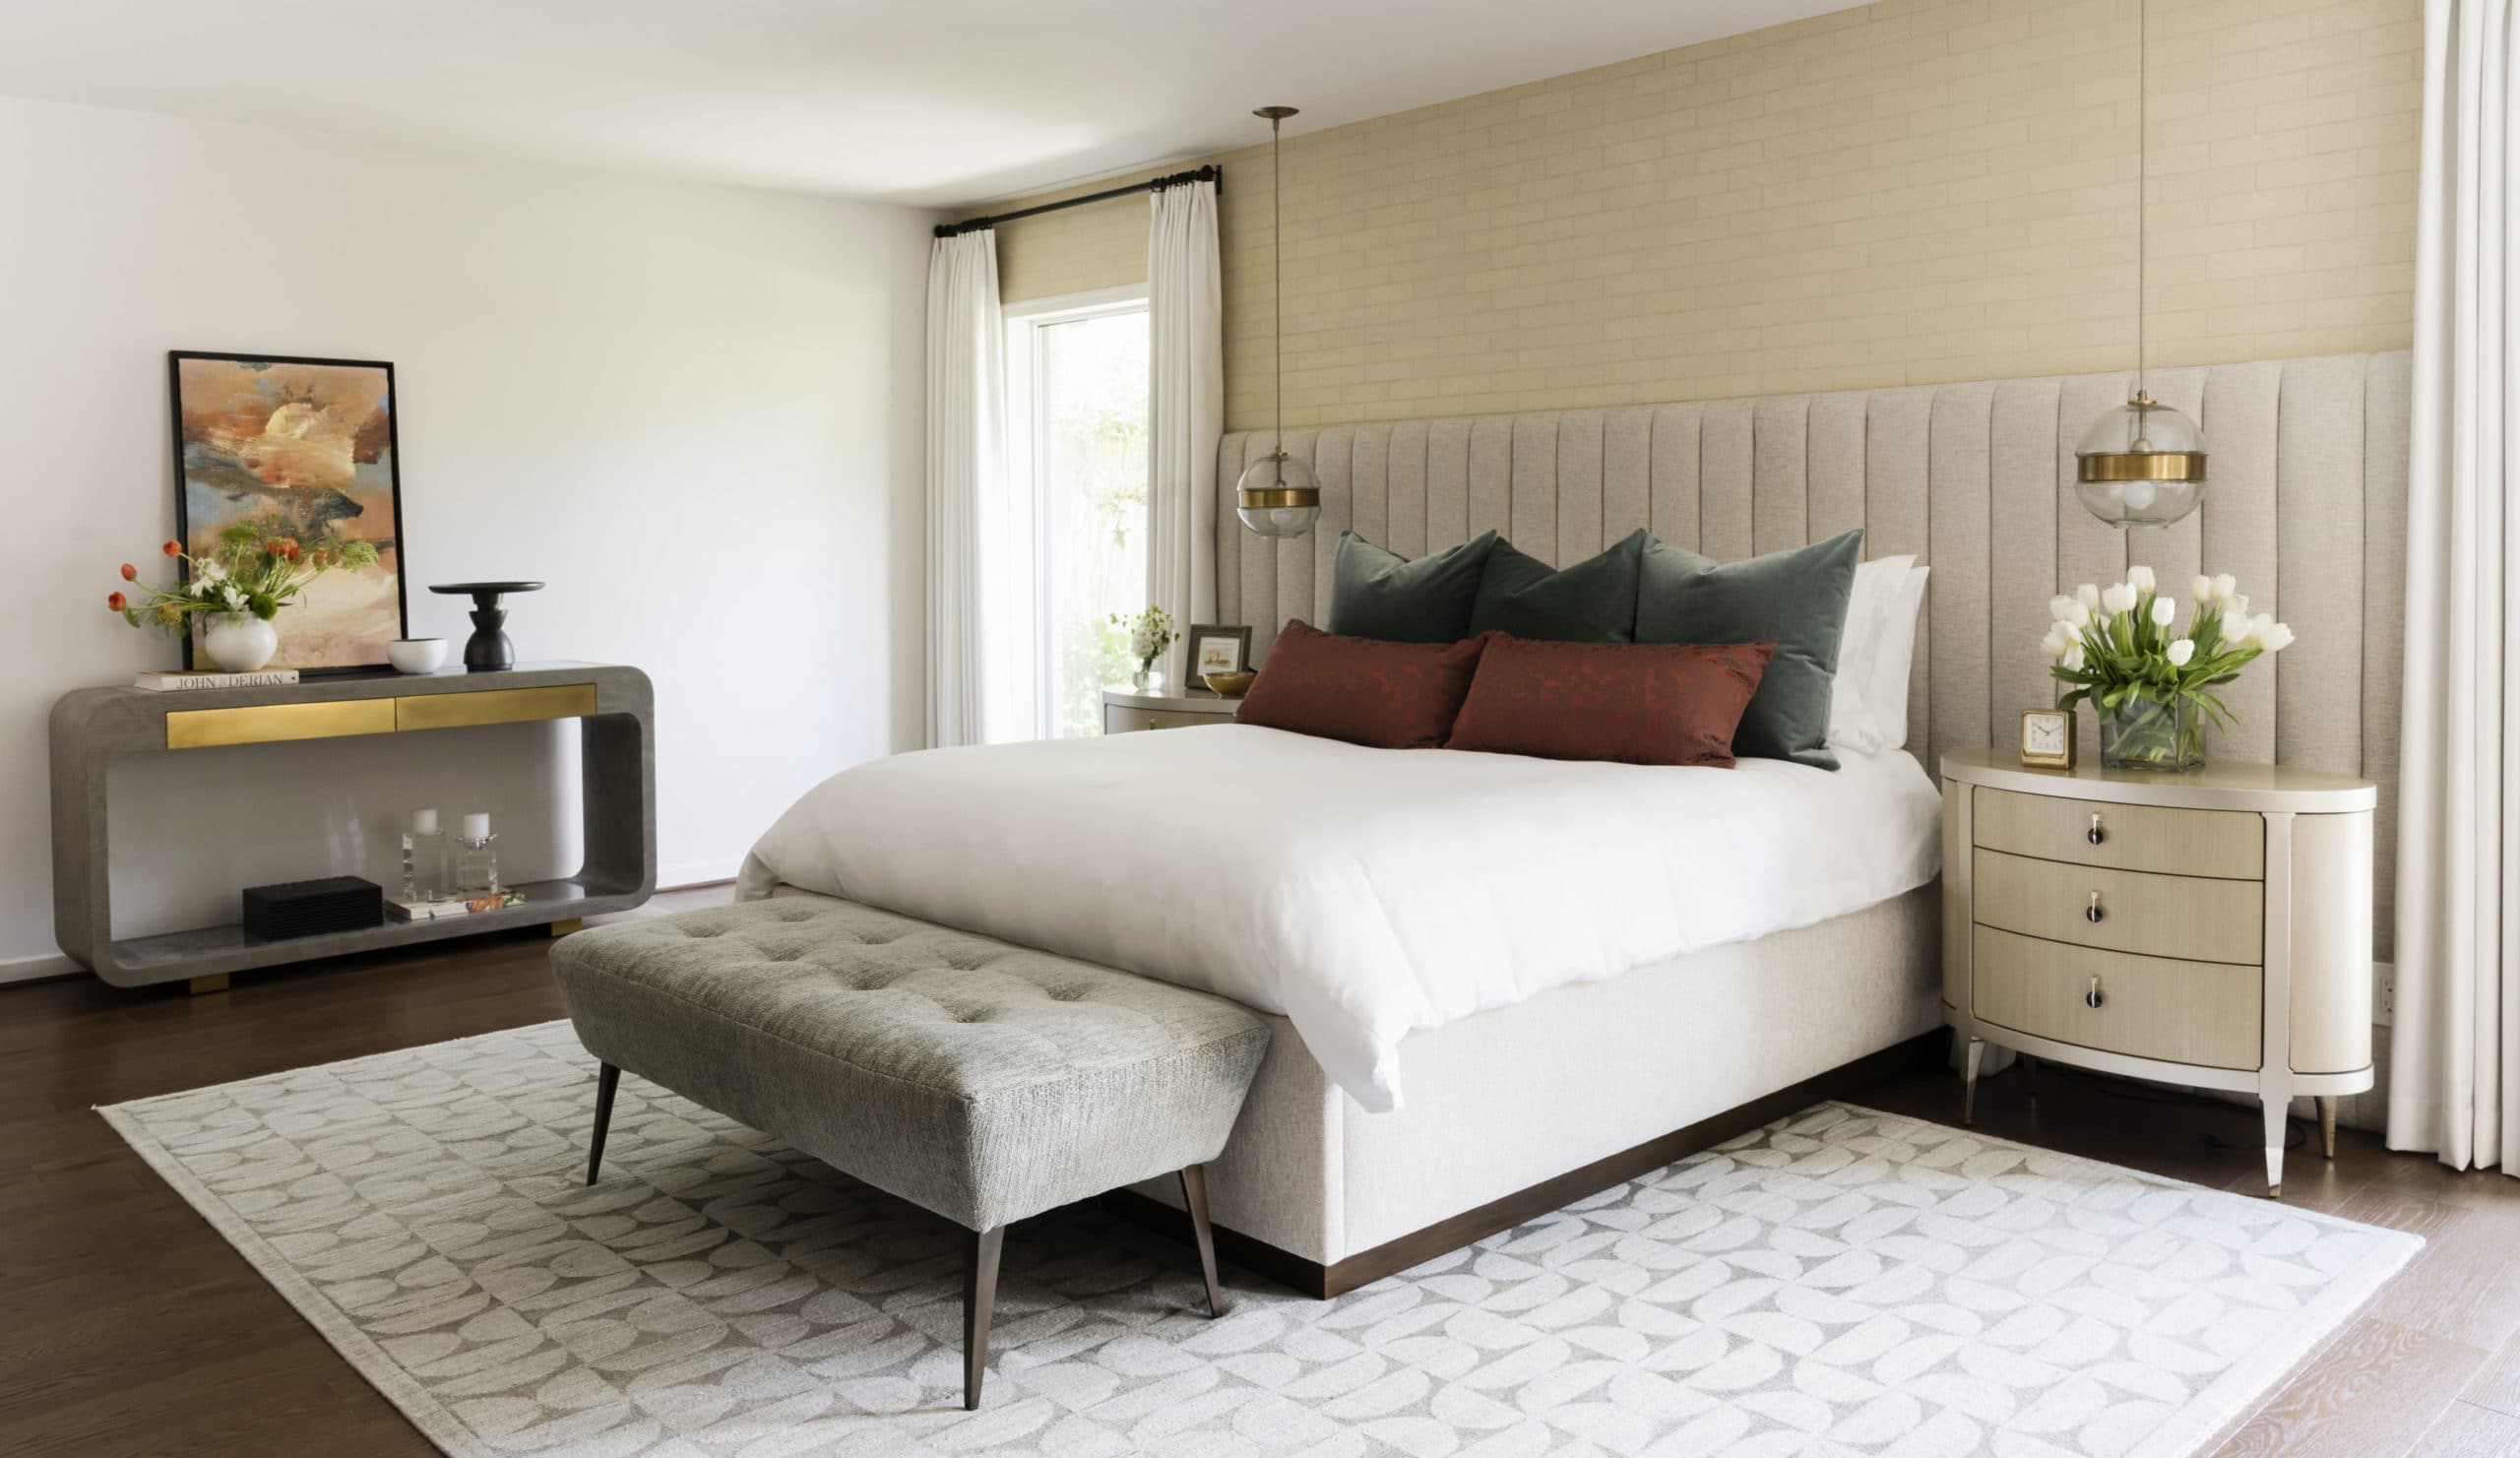 The master bedroom at Green Tree, with upholstered headboard and bench. Interior Design by Laura U Design Collective.